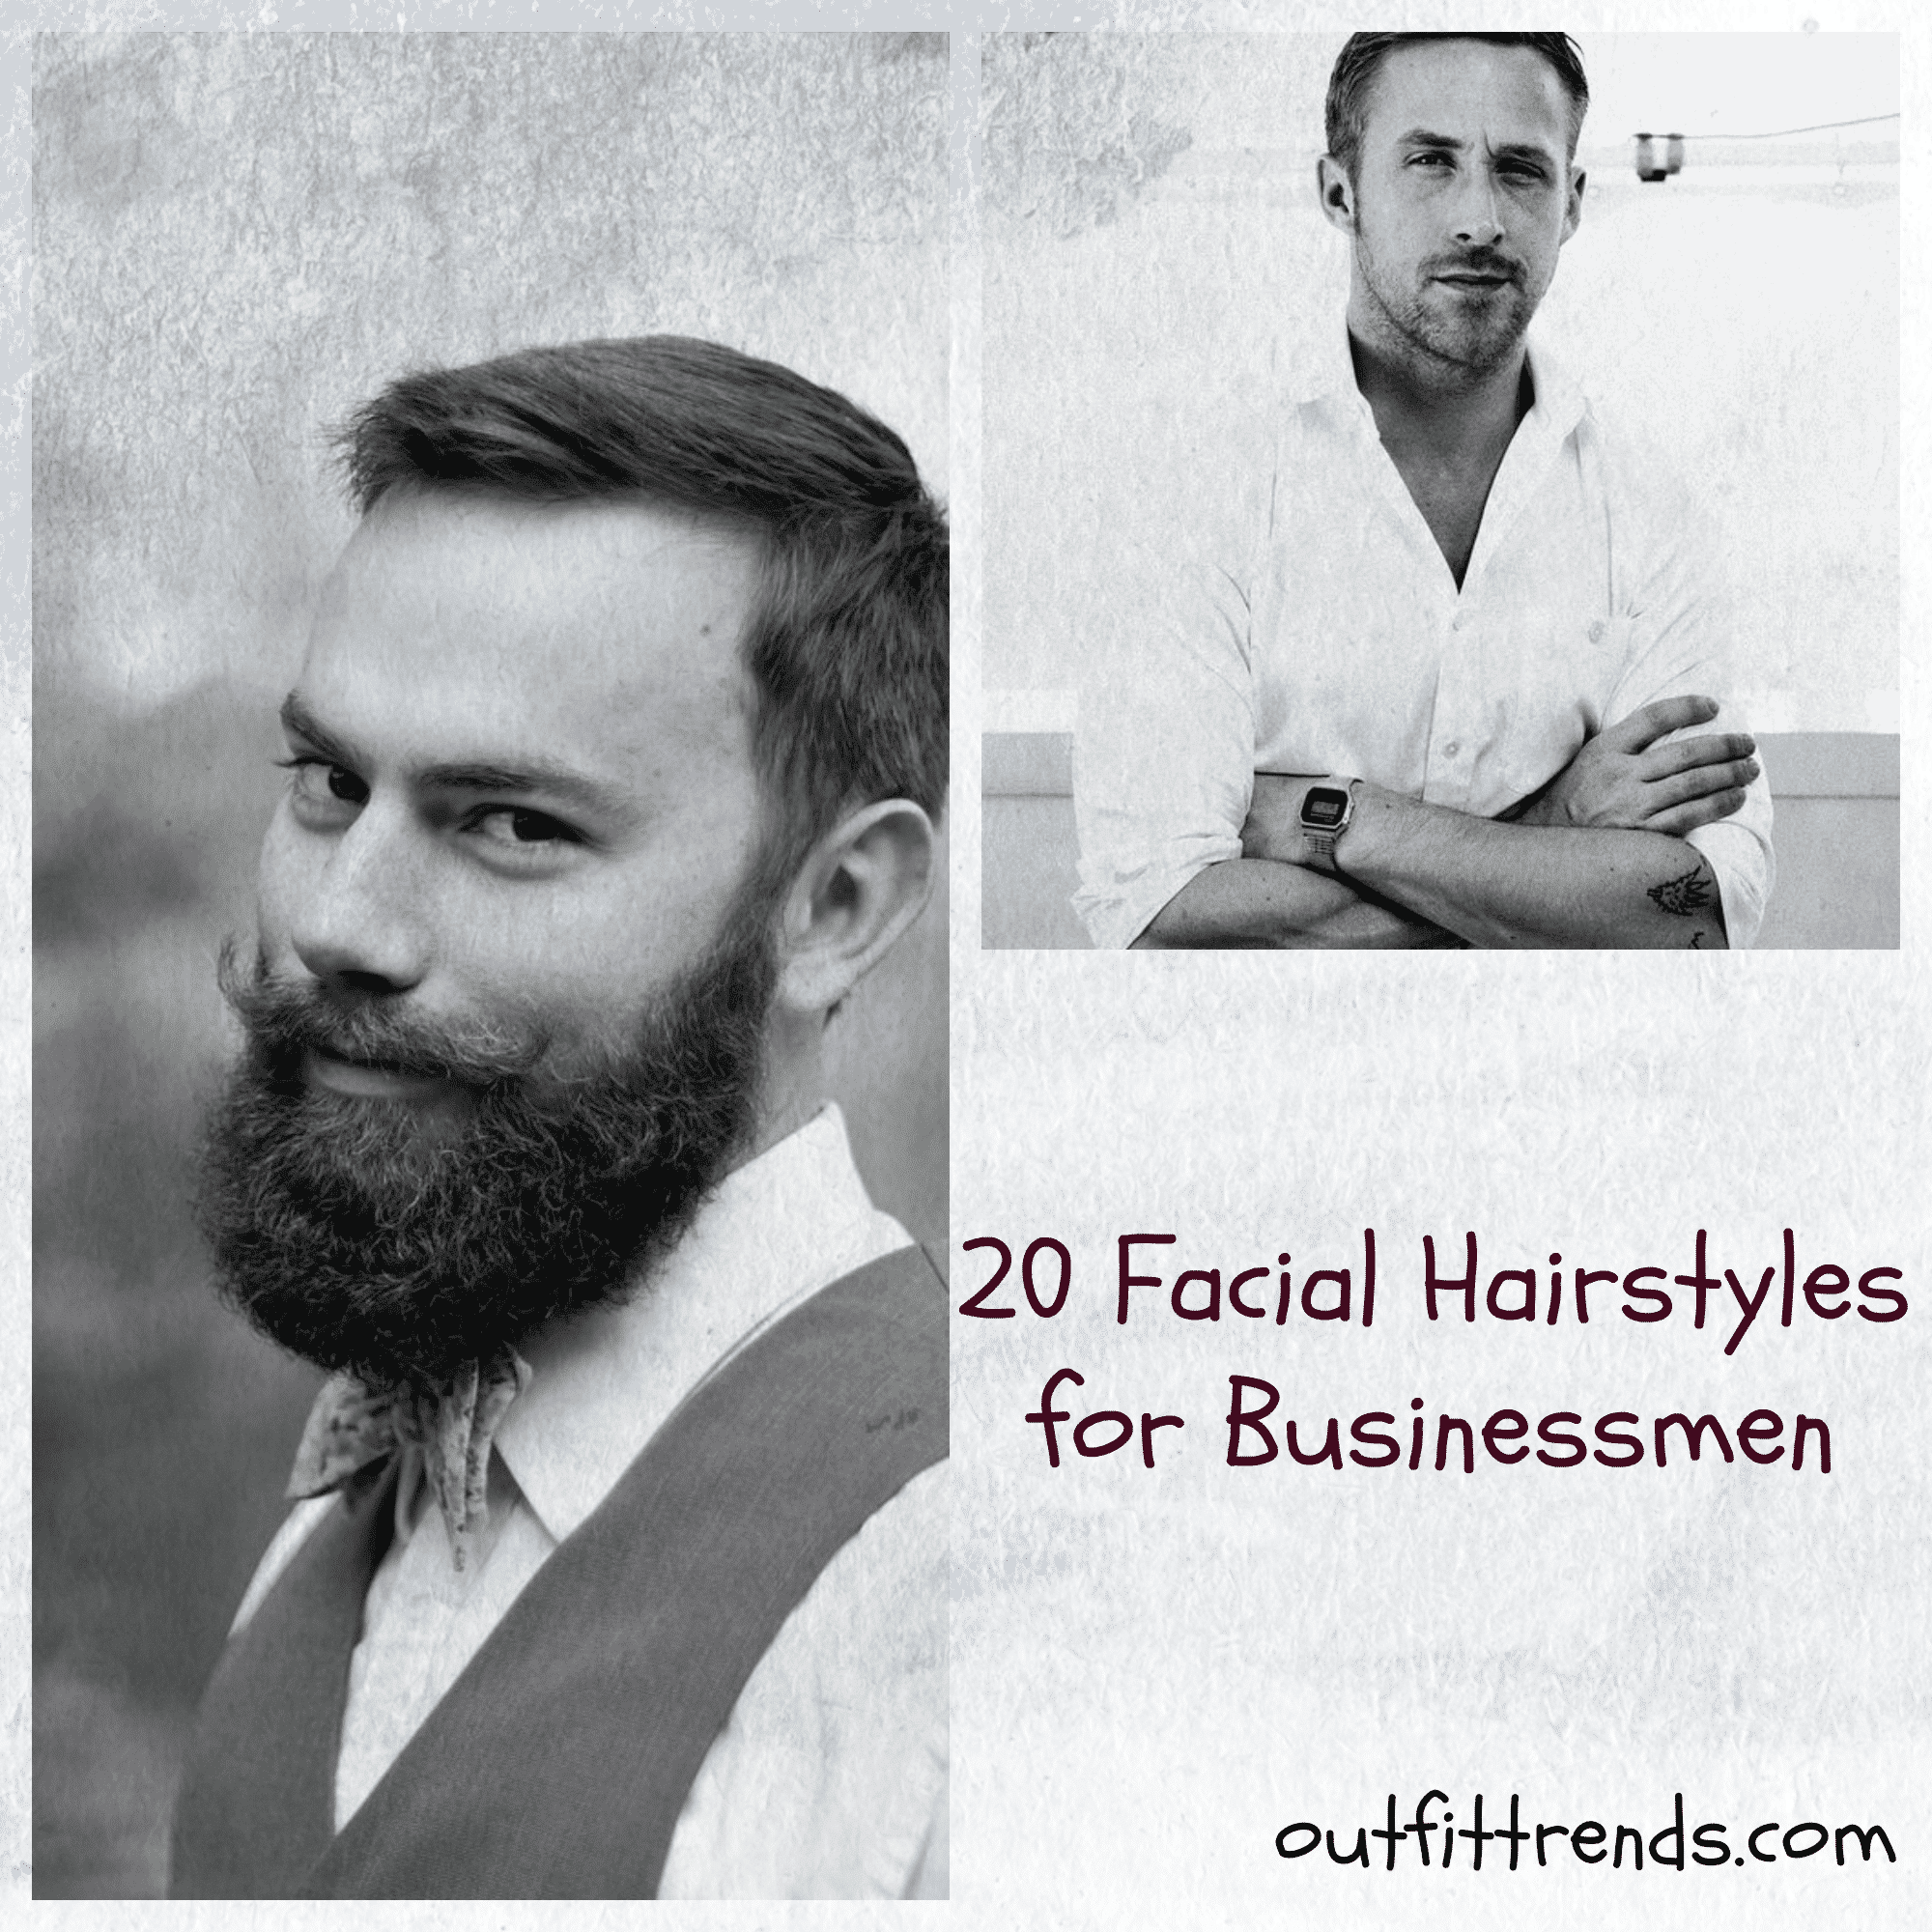 Professional Beard Styles-20 Facial Hairstyle for Businessmen